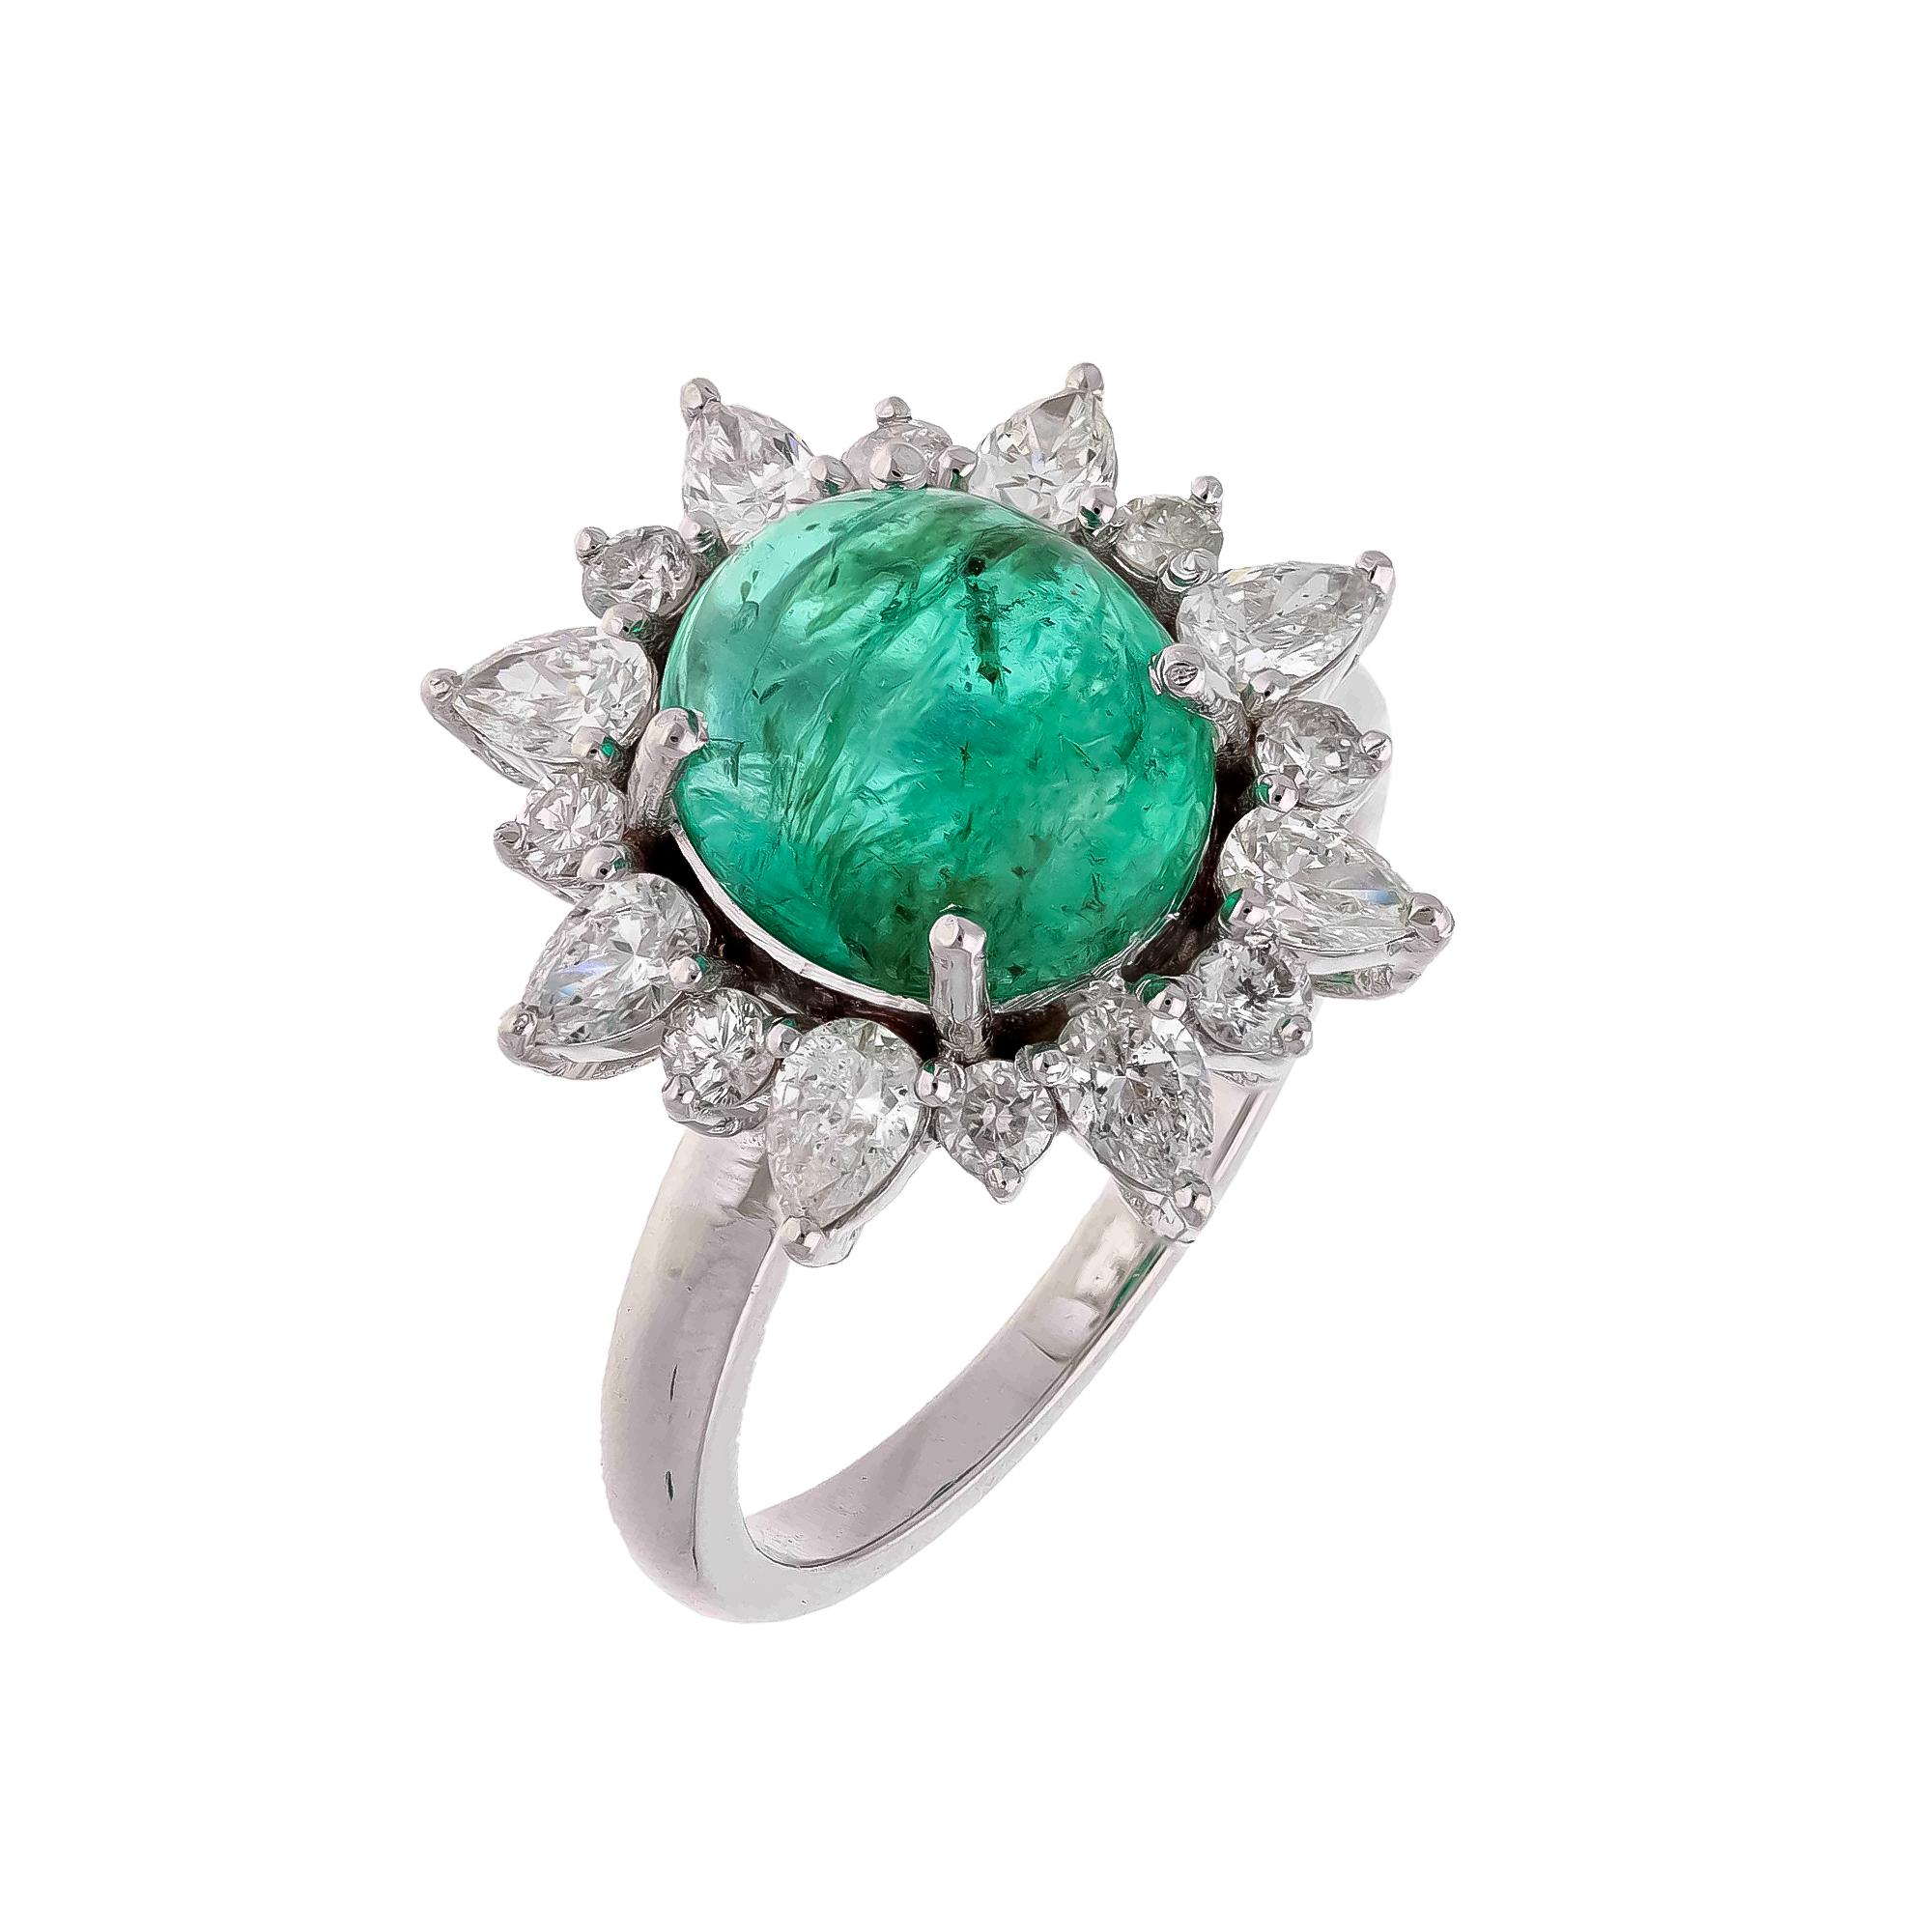 This is a natural Zambian Emerald ring with diamonds and 18k gold. The emeralds are very high quality and very good quality diamonds the clarity is vsi and G colour


Emeralds : 3.28 carats
diamonds : 1.02 carats
gold :5.04 gms

This is a Brand new